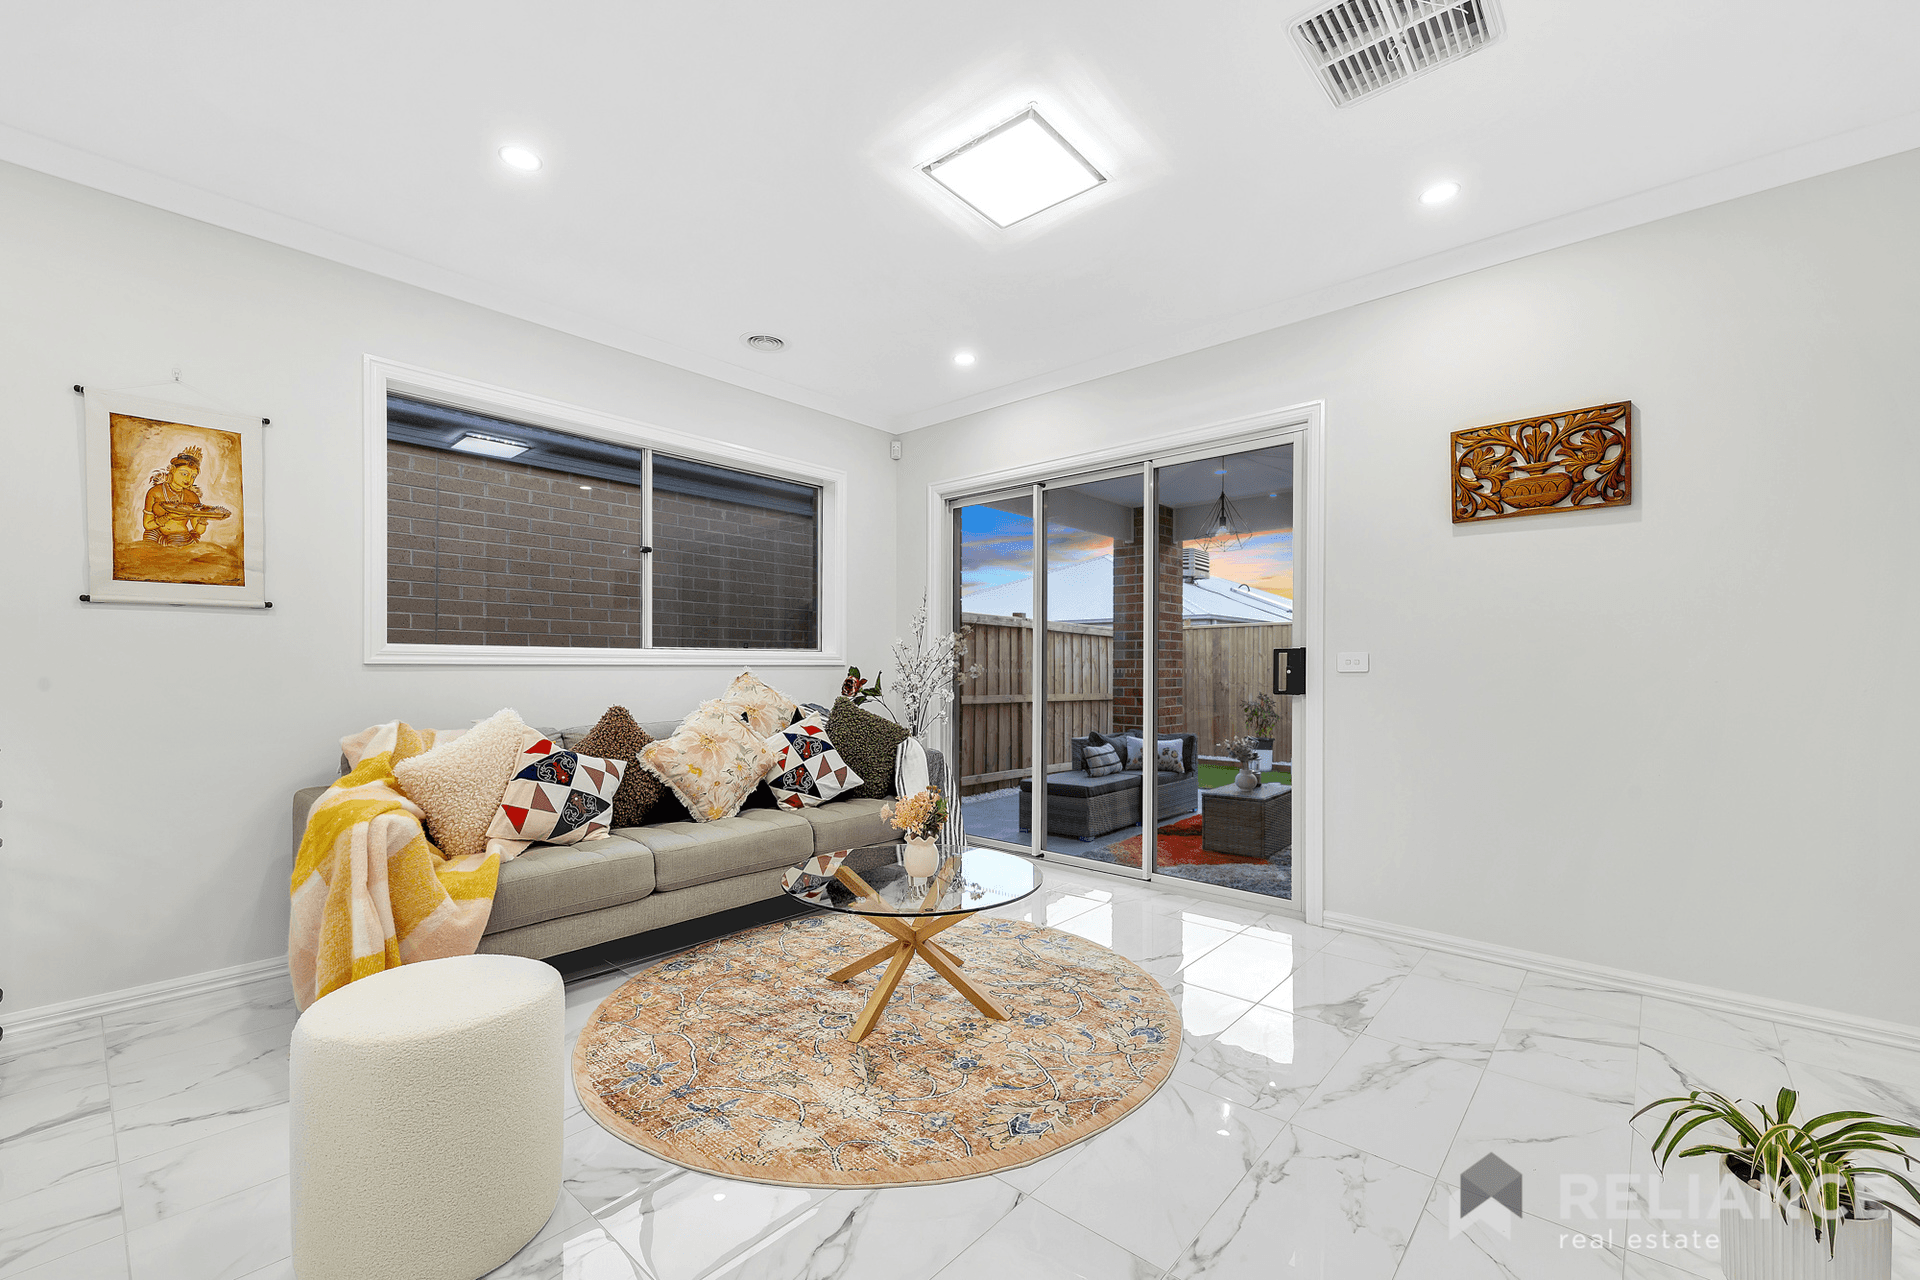 3 Illusion Terrace, Diggers Rest, VIC 3427